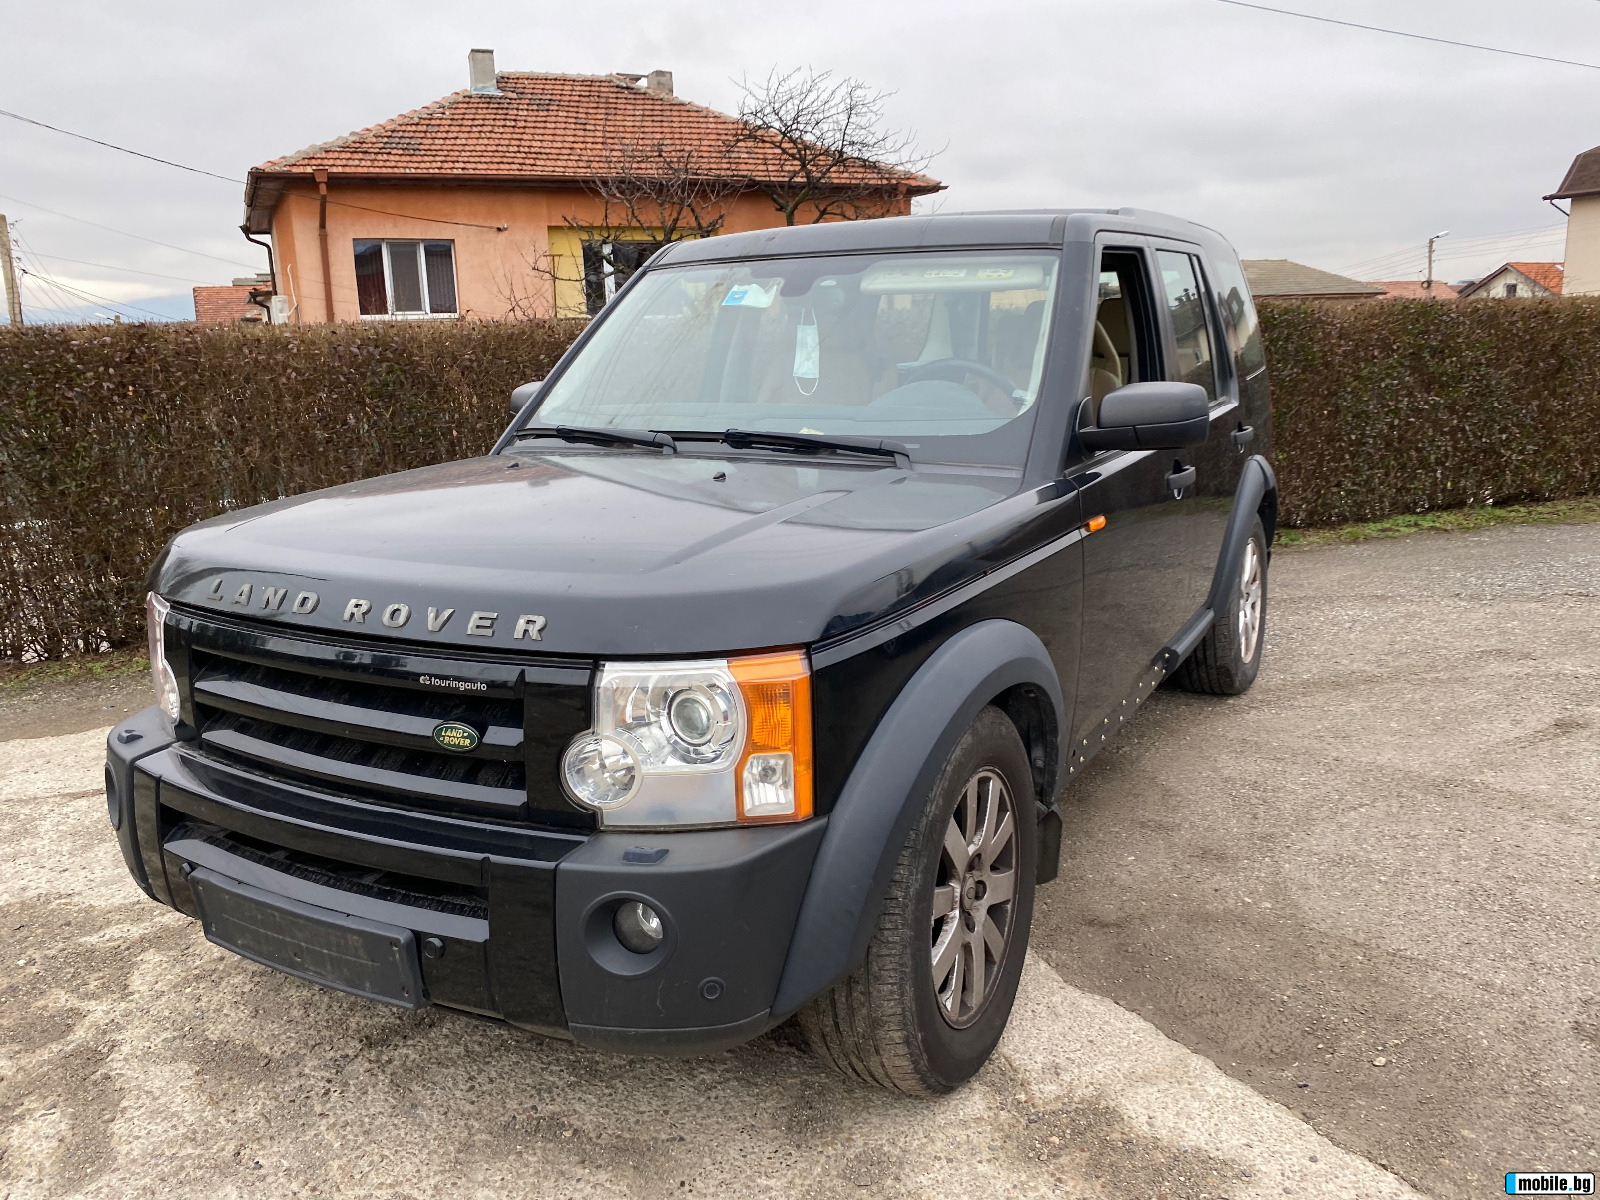 Land Rover Discovery 2.7 tdi | Mobile.bg   2